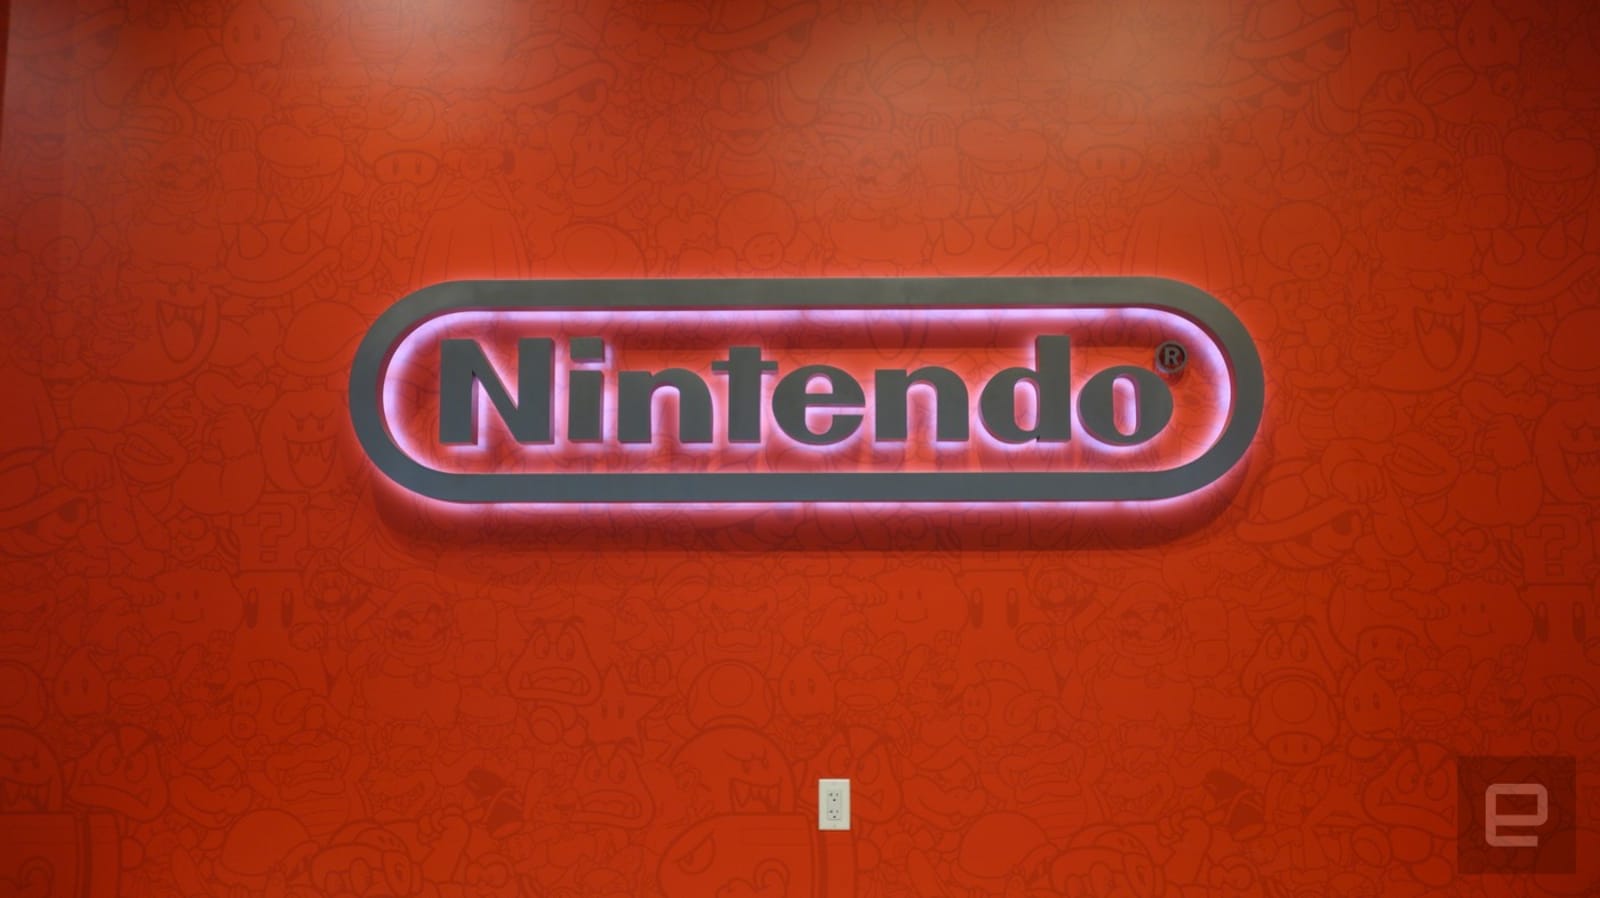 Report: Nintendo NX is a tablet with detachable controllers